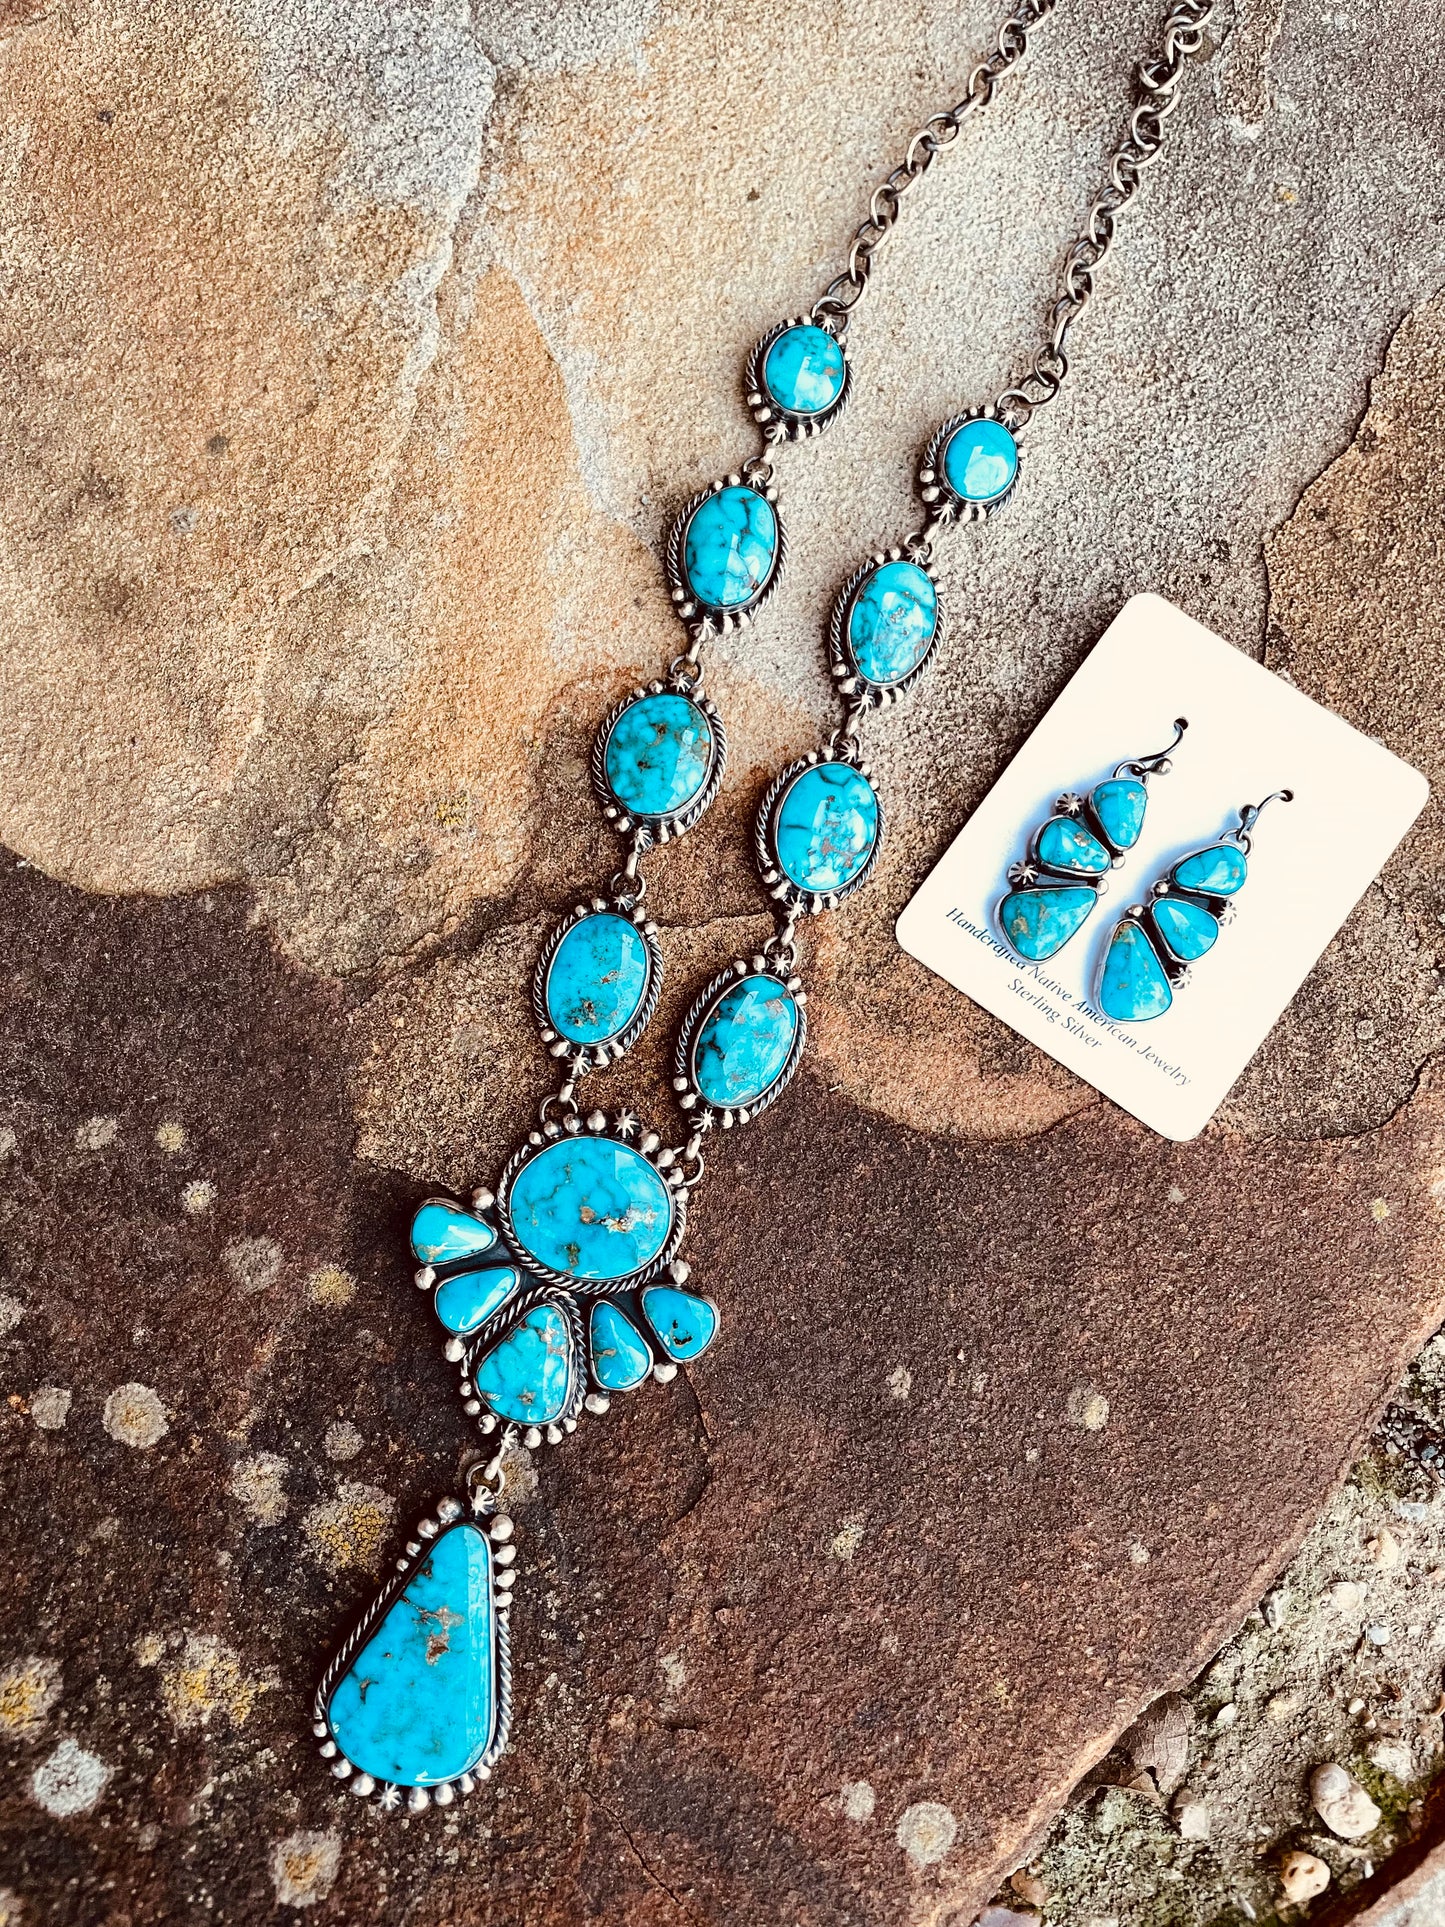 Breathtaking beauty! Blue Ridge Necklace and earrings set by A. Martin